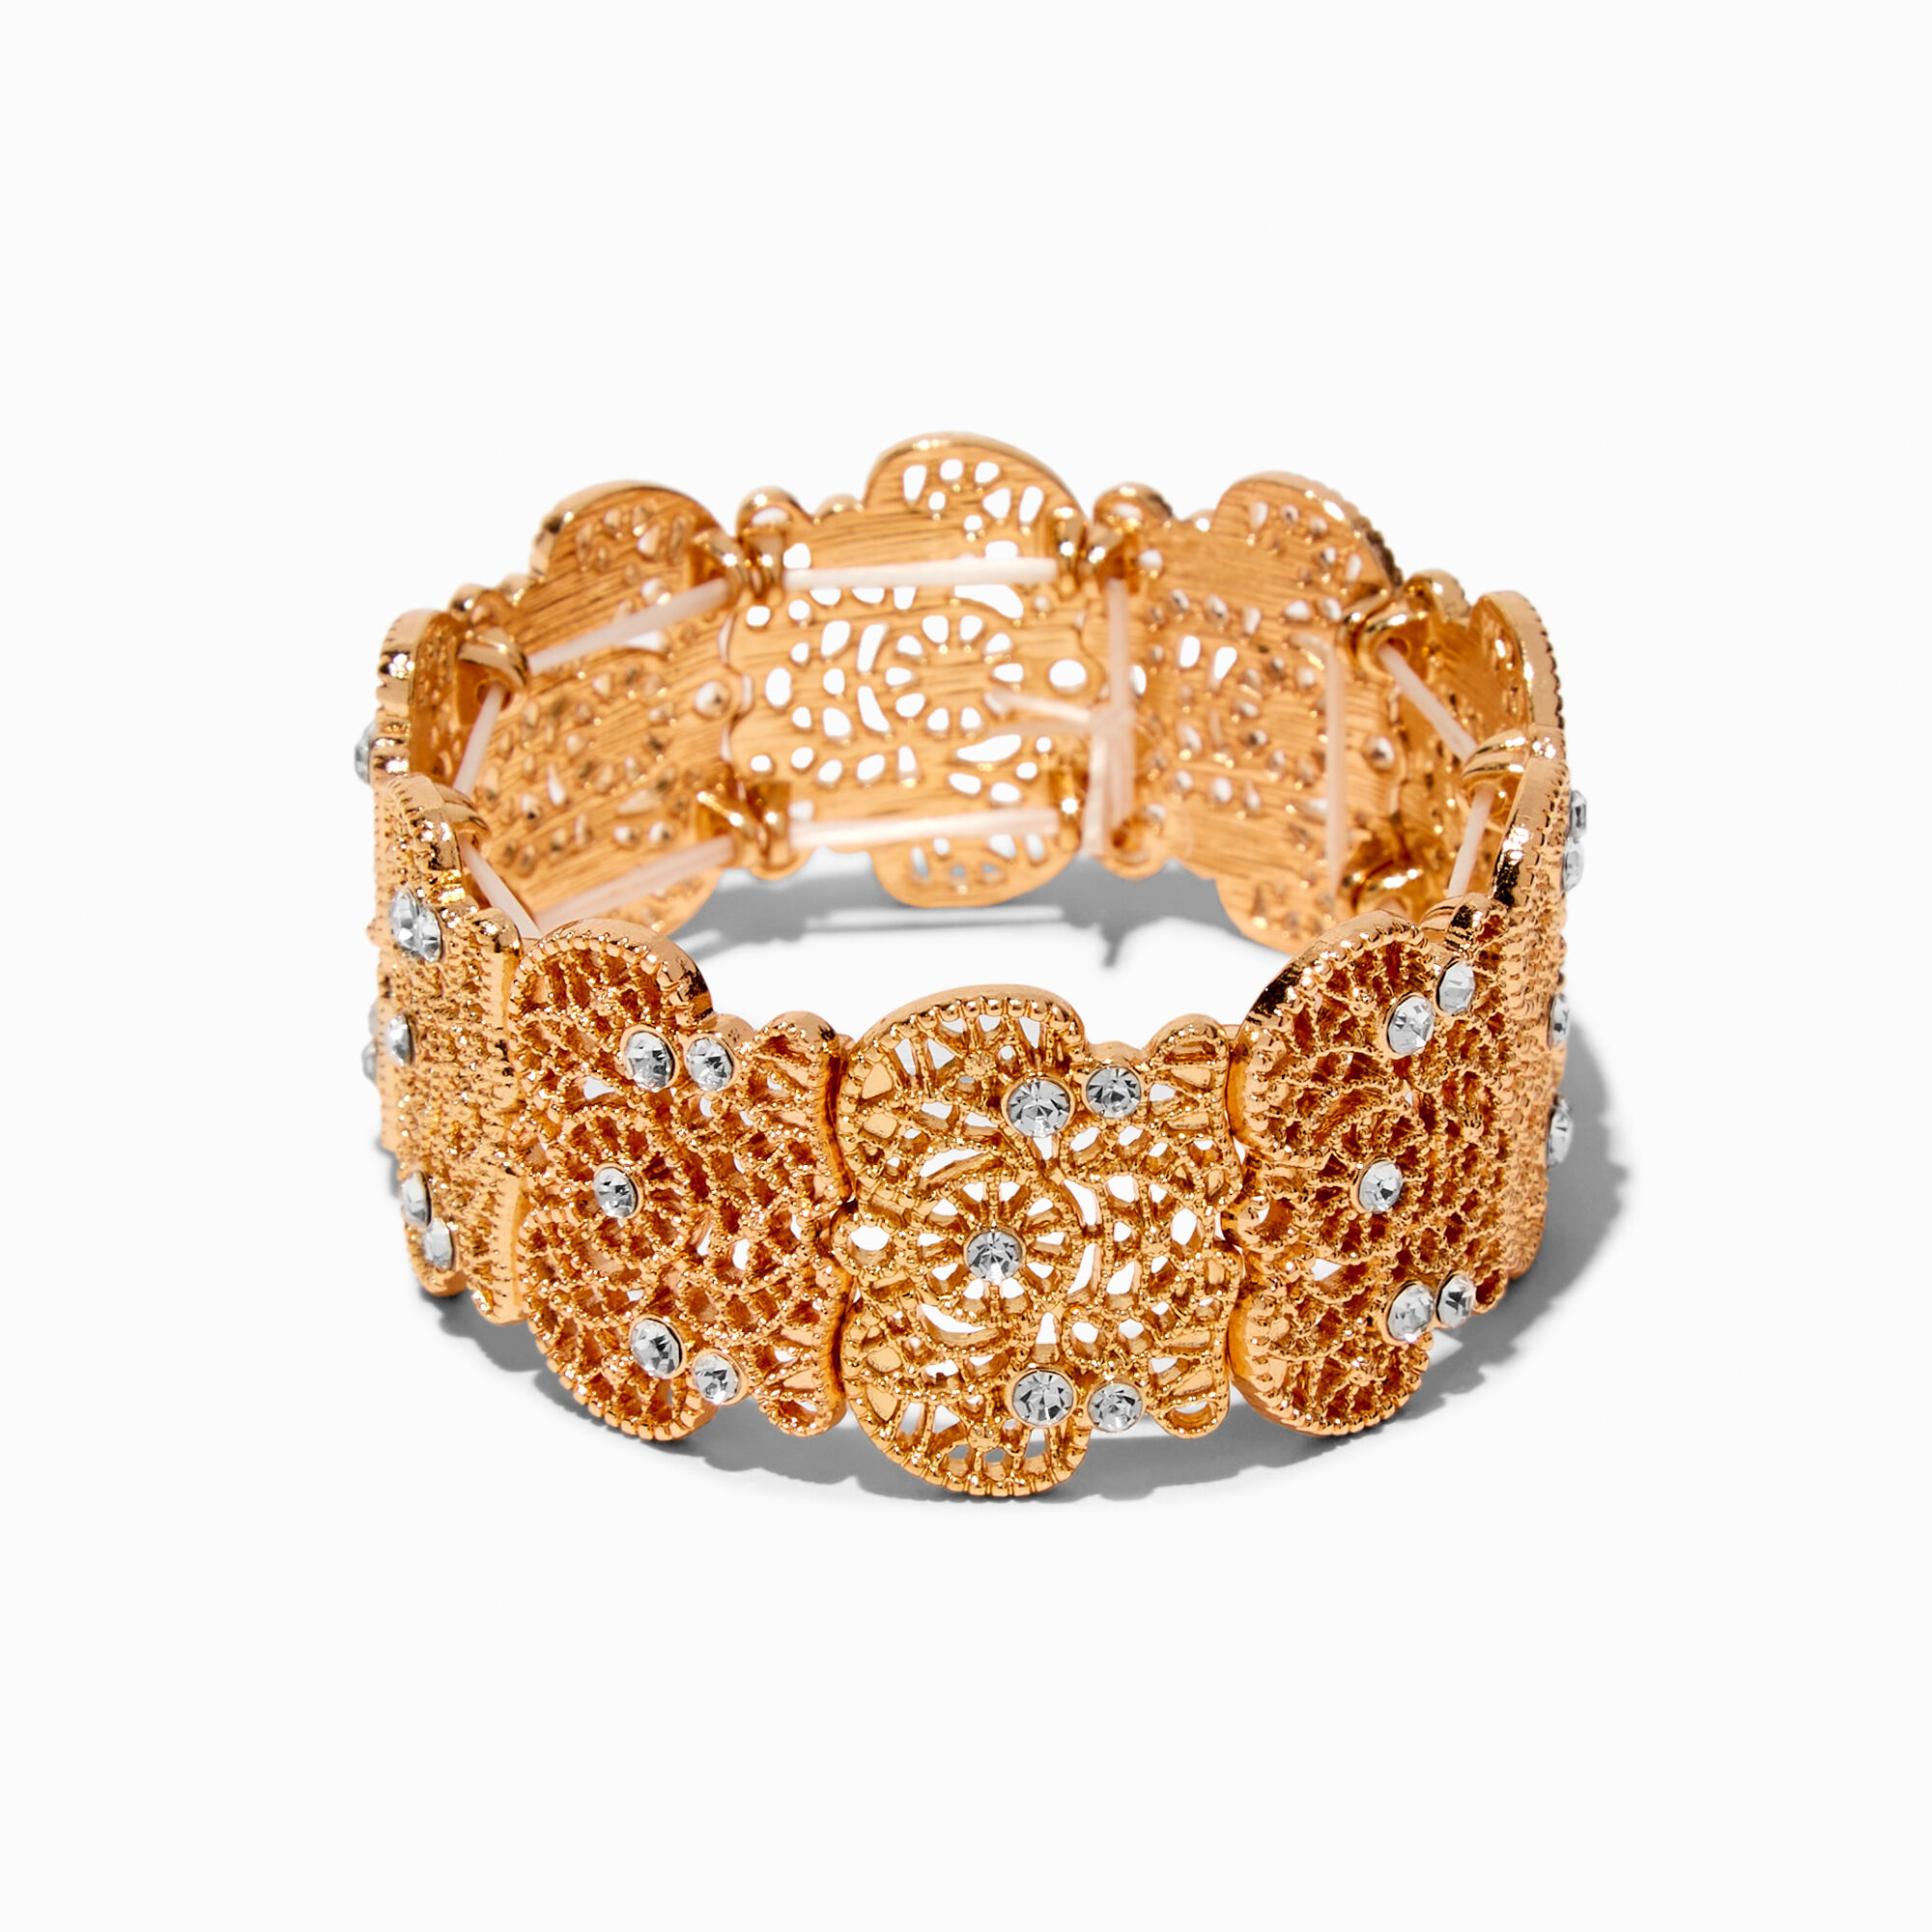 View Claires Tone Filigree Stretch Bracelet Gold information